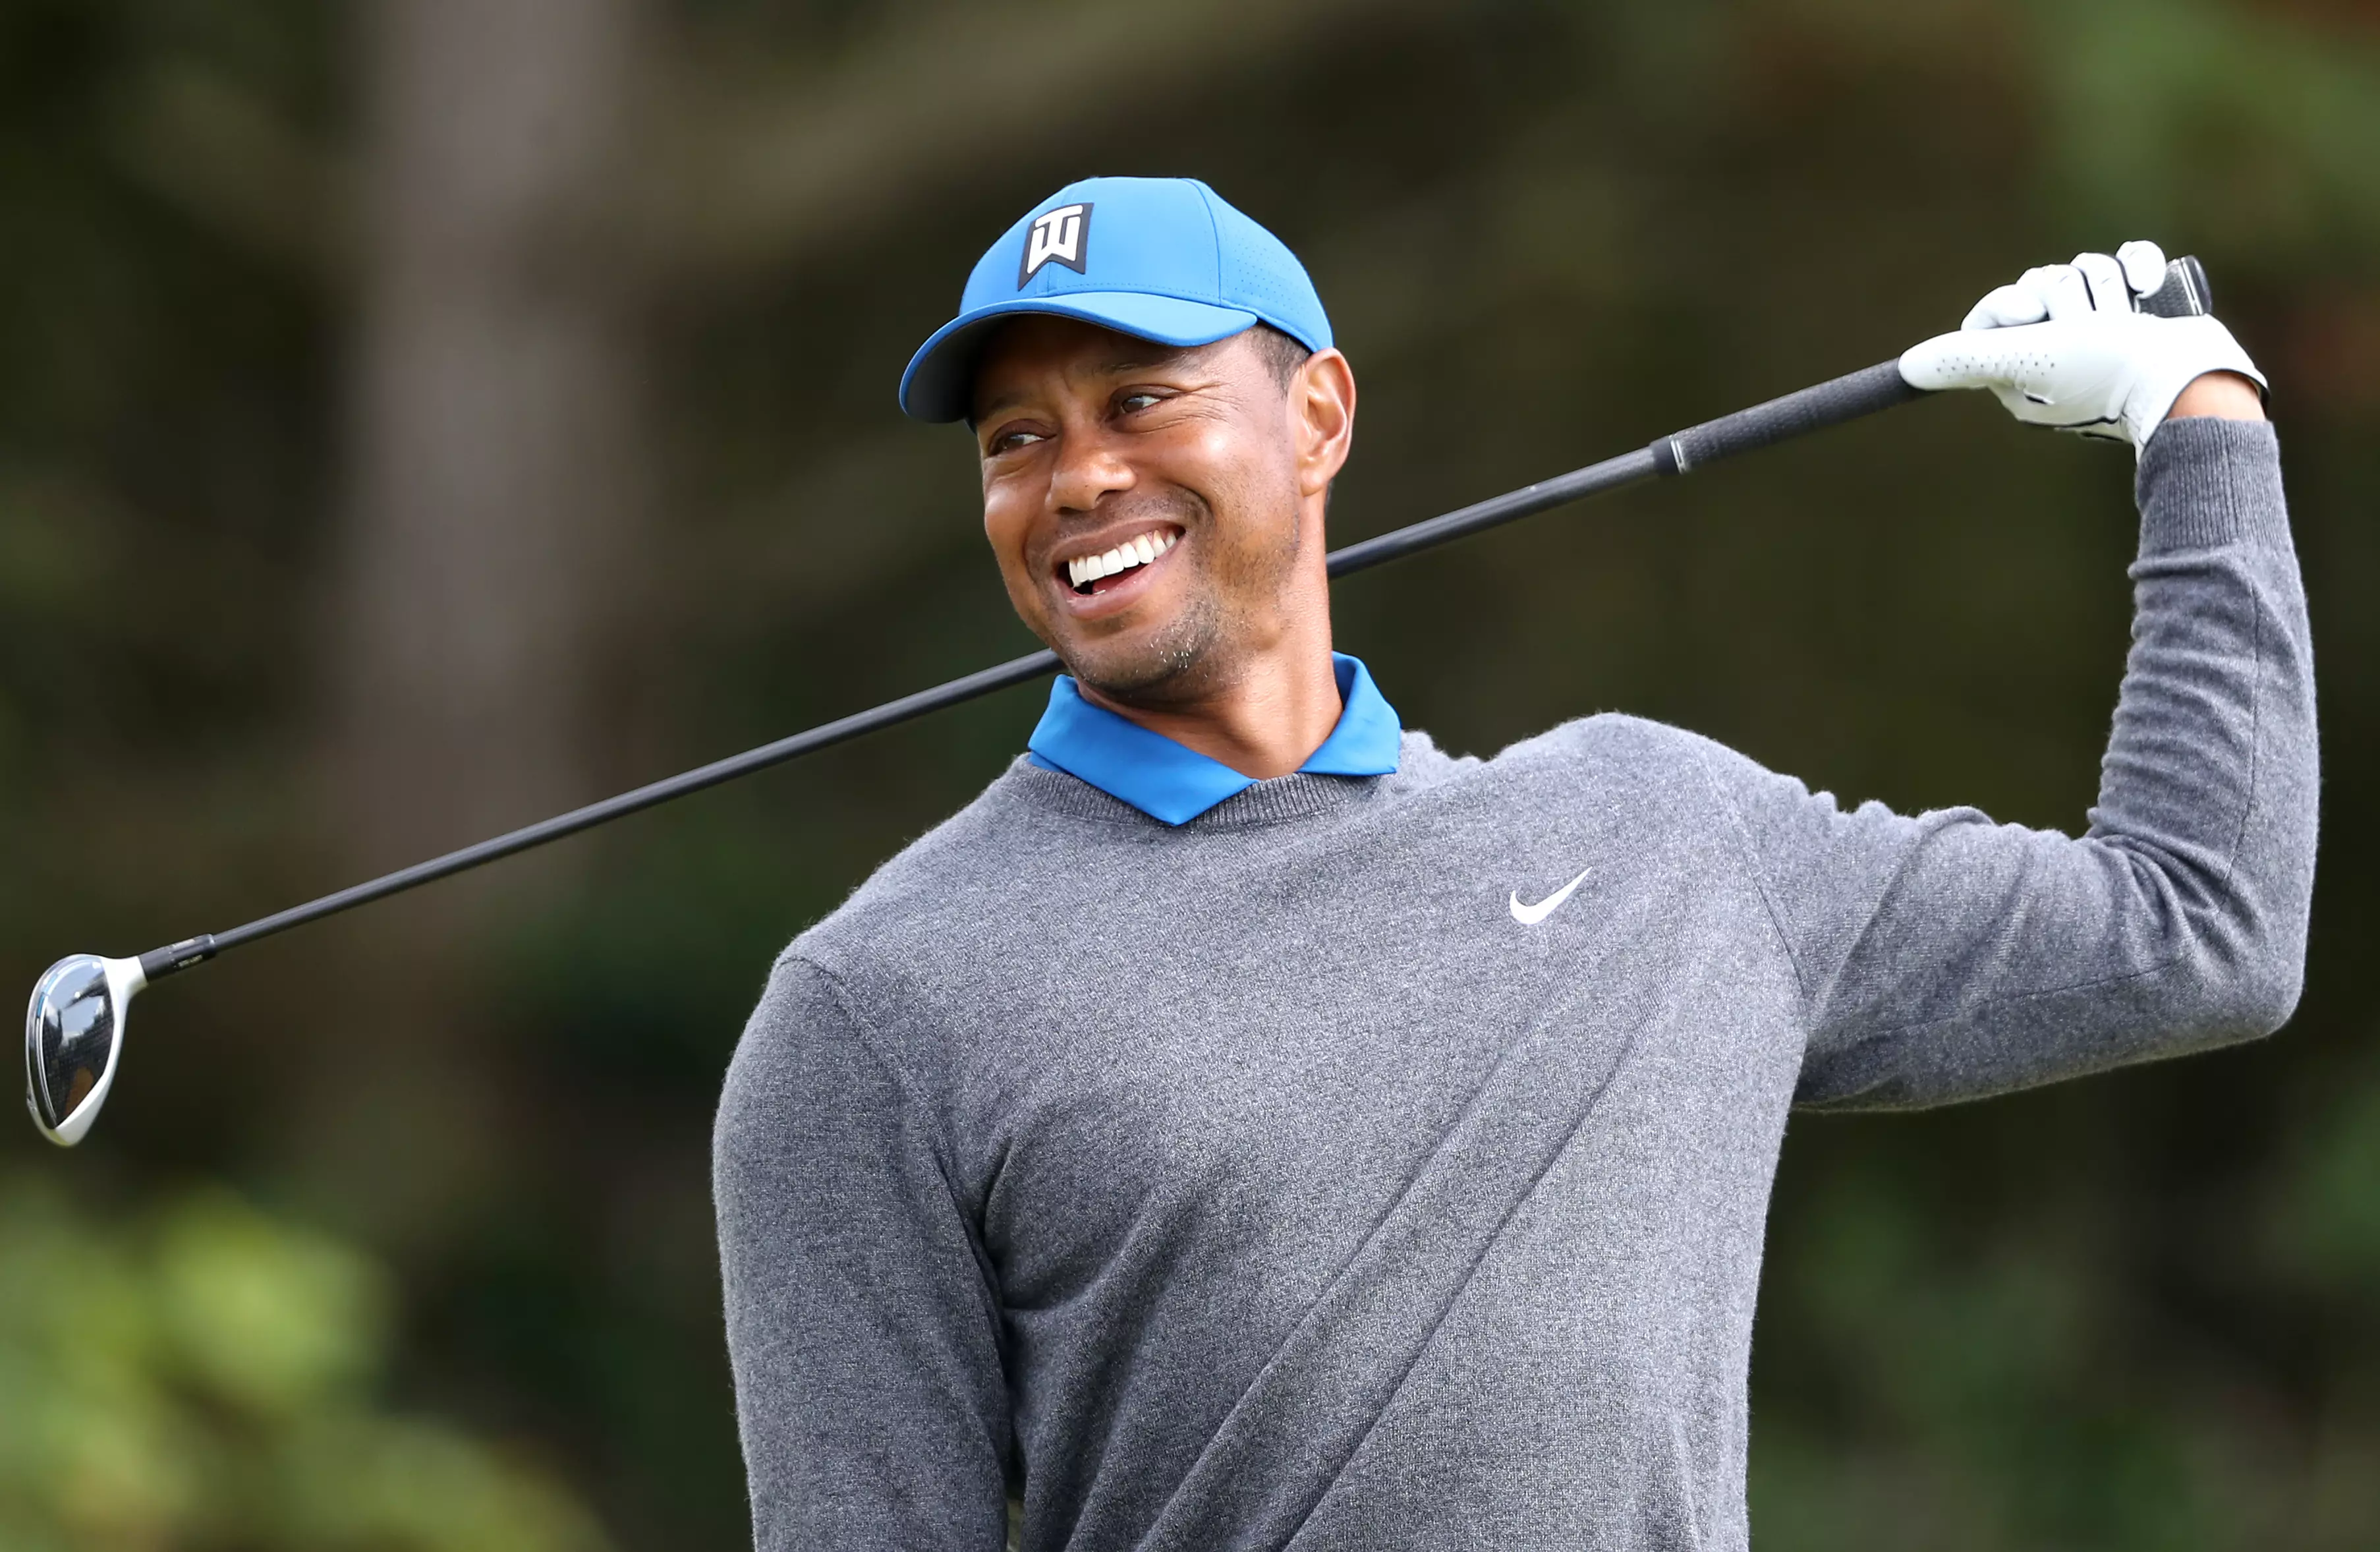 Tiger Woods is also a member of the $1 billion club. (Image